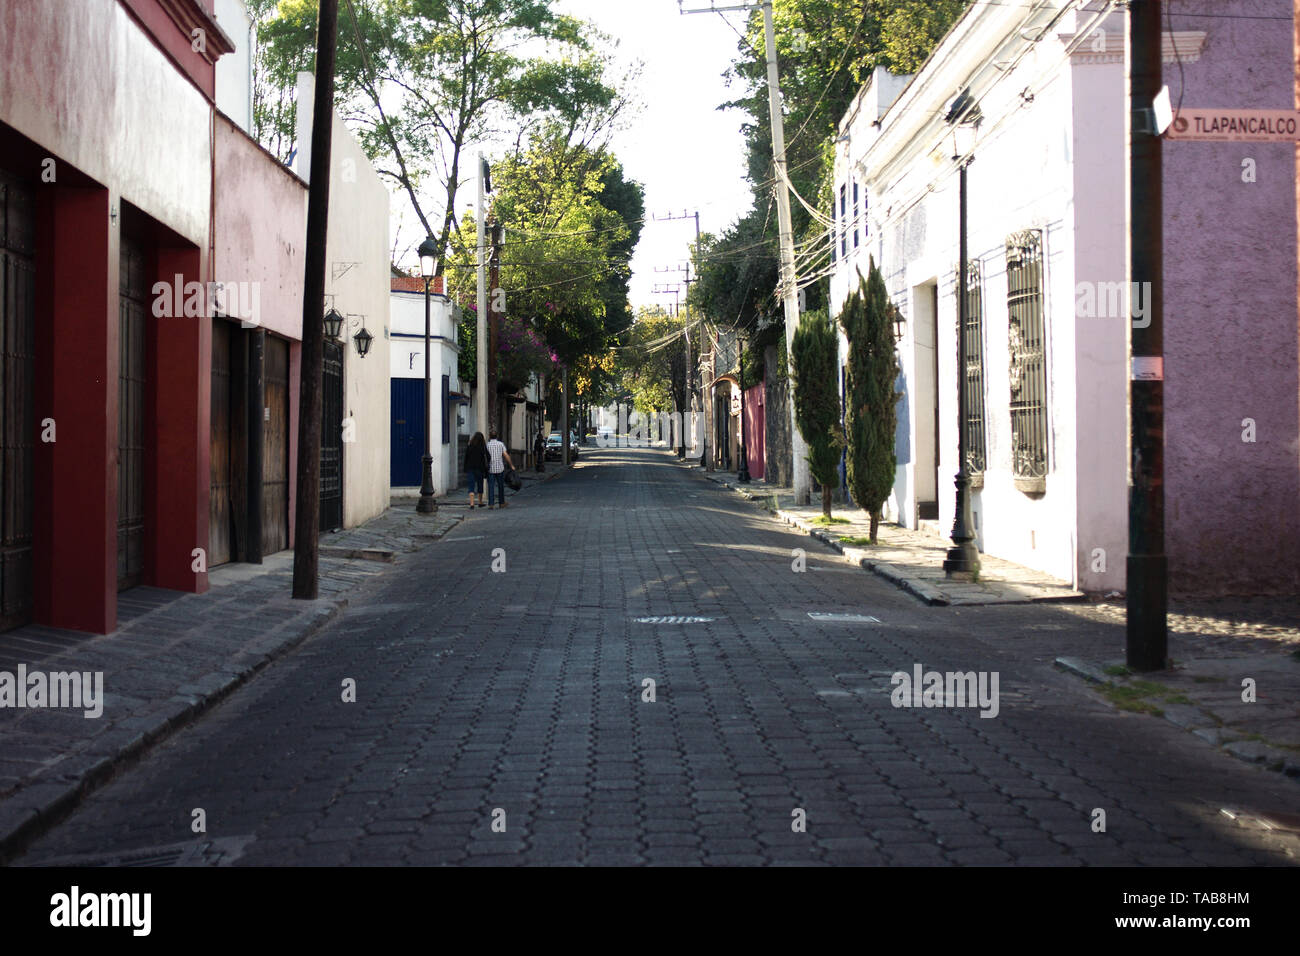 Mexico City, Mexico - 2019: A traditional cobblestone street in the Coyoacan district historic center, a famous touristic neighborhood. Stock Photo